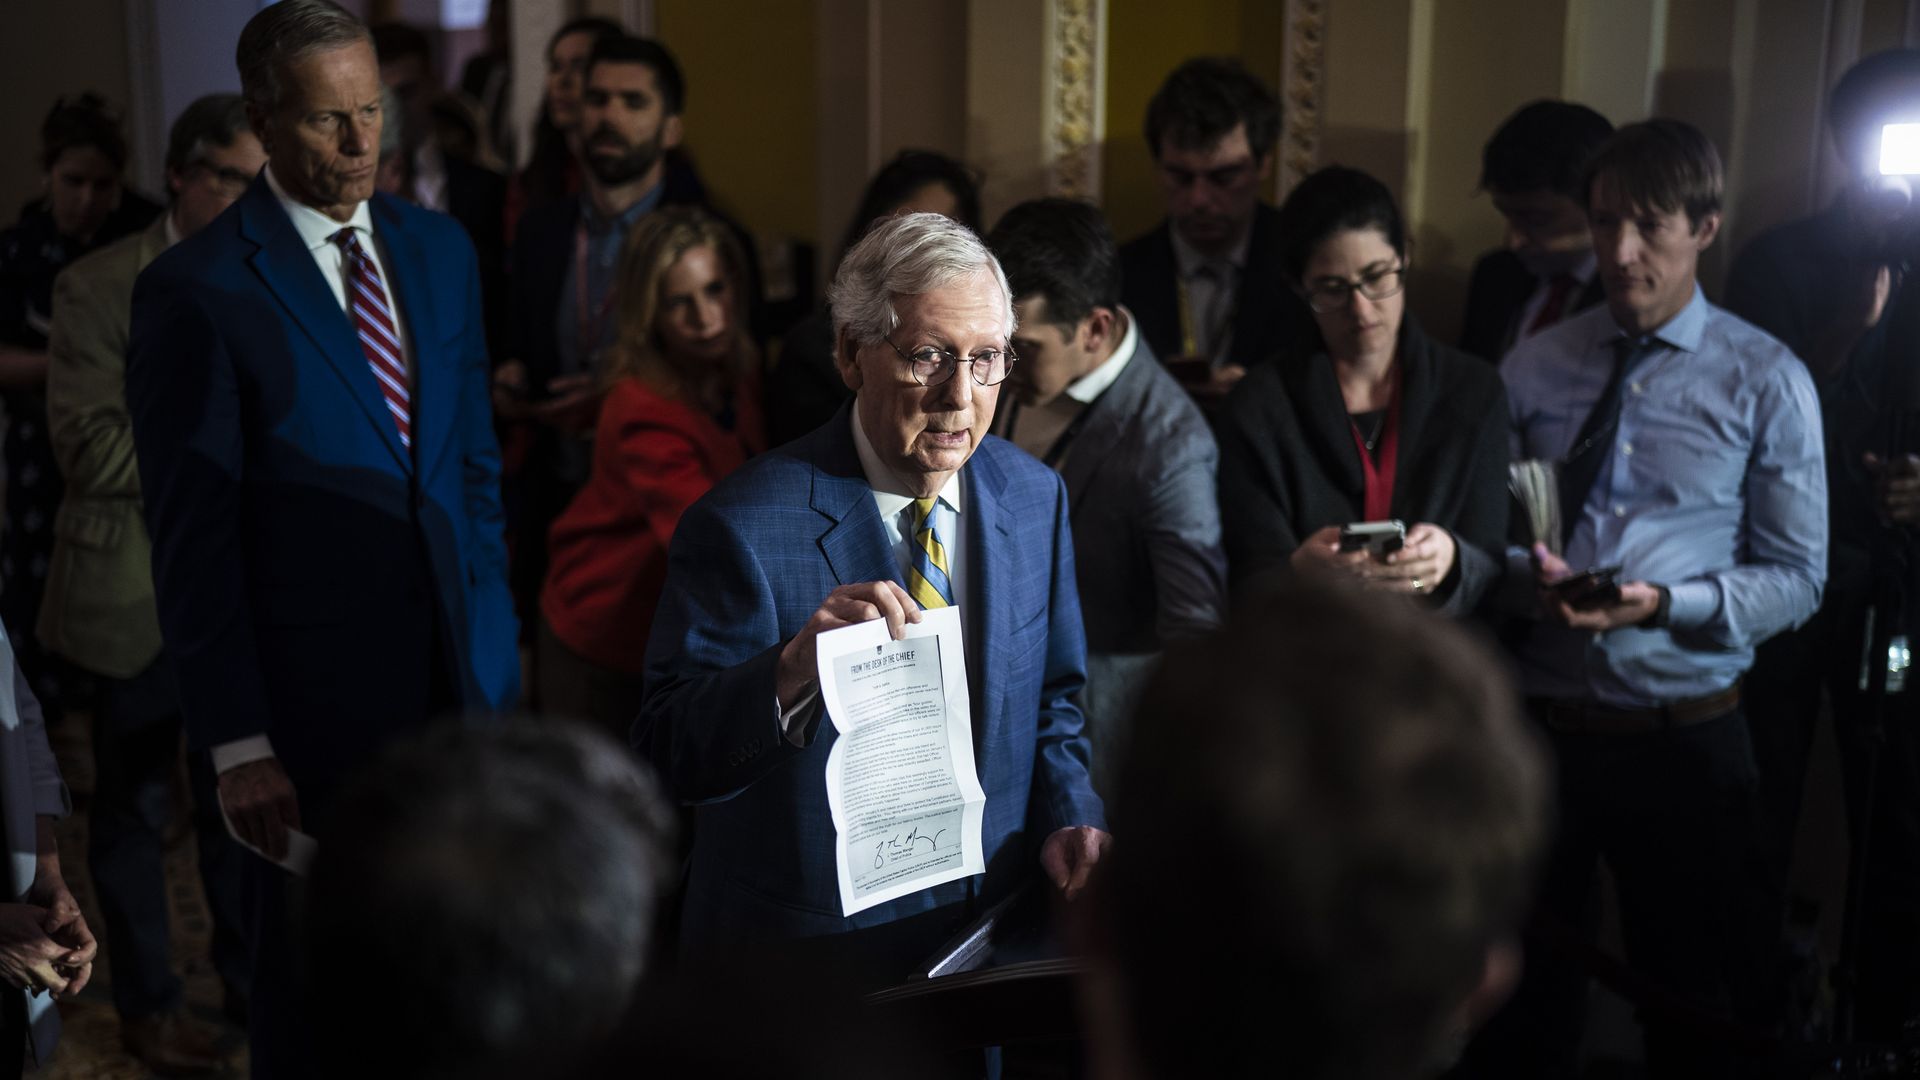 Sen. Mitch McConnell, wearing a blue suit and white shirt, holds up a piece of paper while surrounded by colleagues and Capitol Hill reporters.